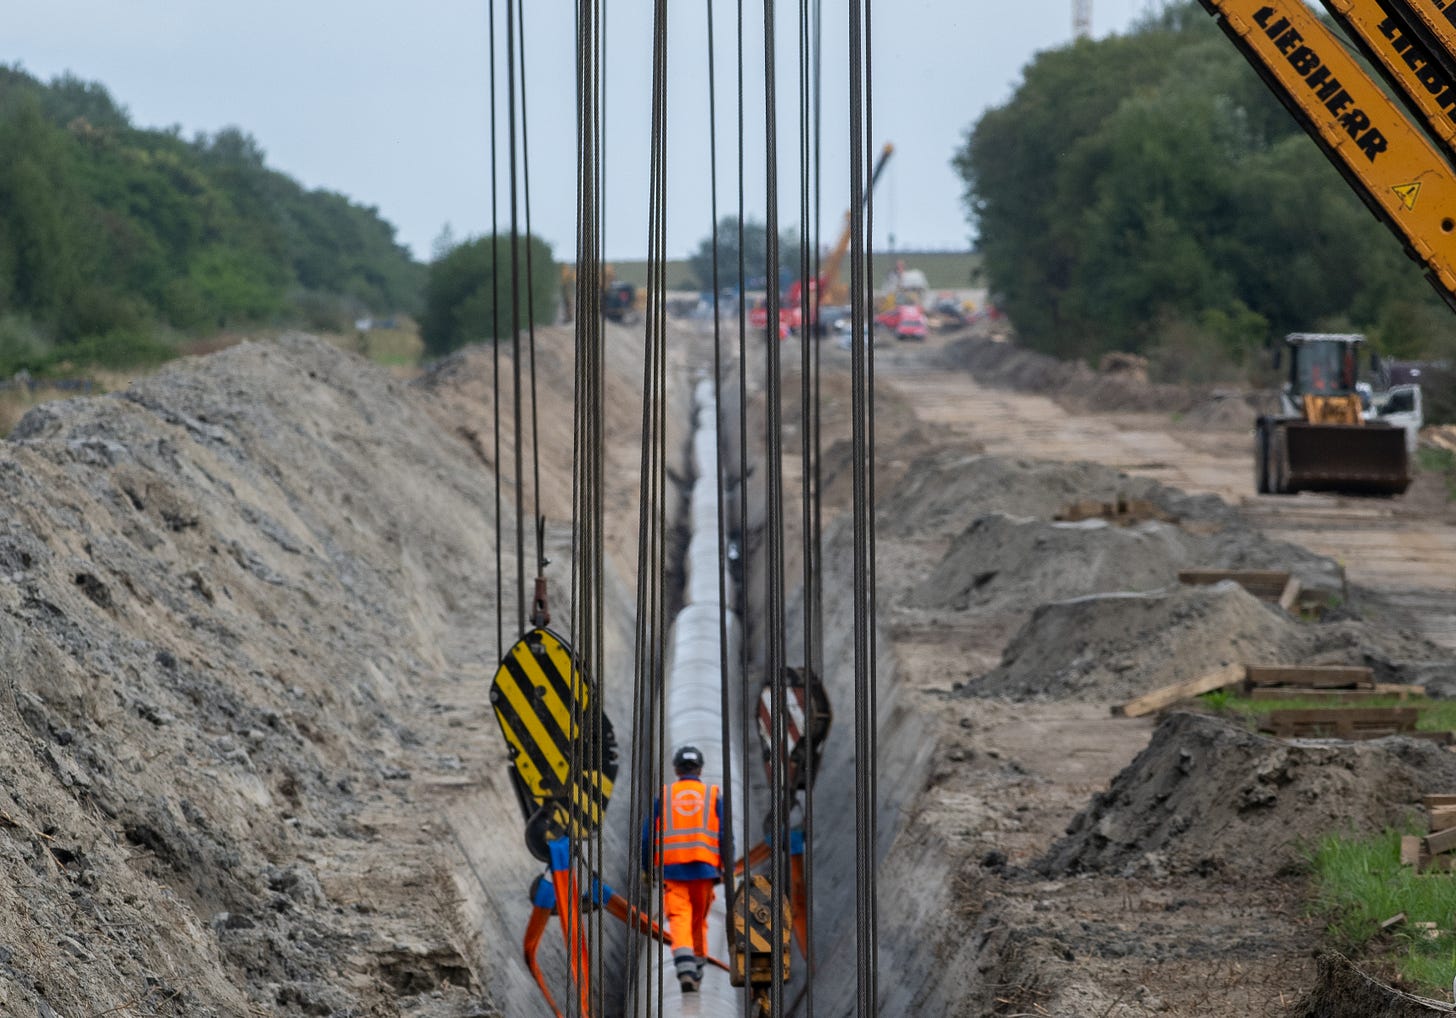 Workers construct a pipeline for transporting natural gas on September 14, 2022 near Wilhelmshaven, Germany. (Photo by David Hecker/Getty Images).